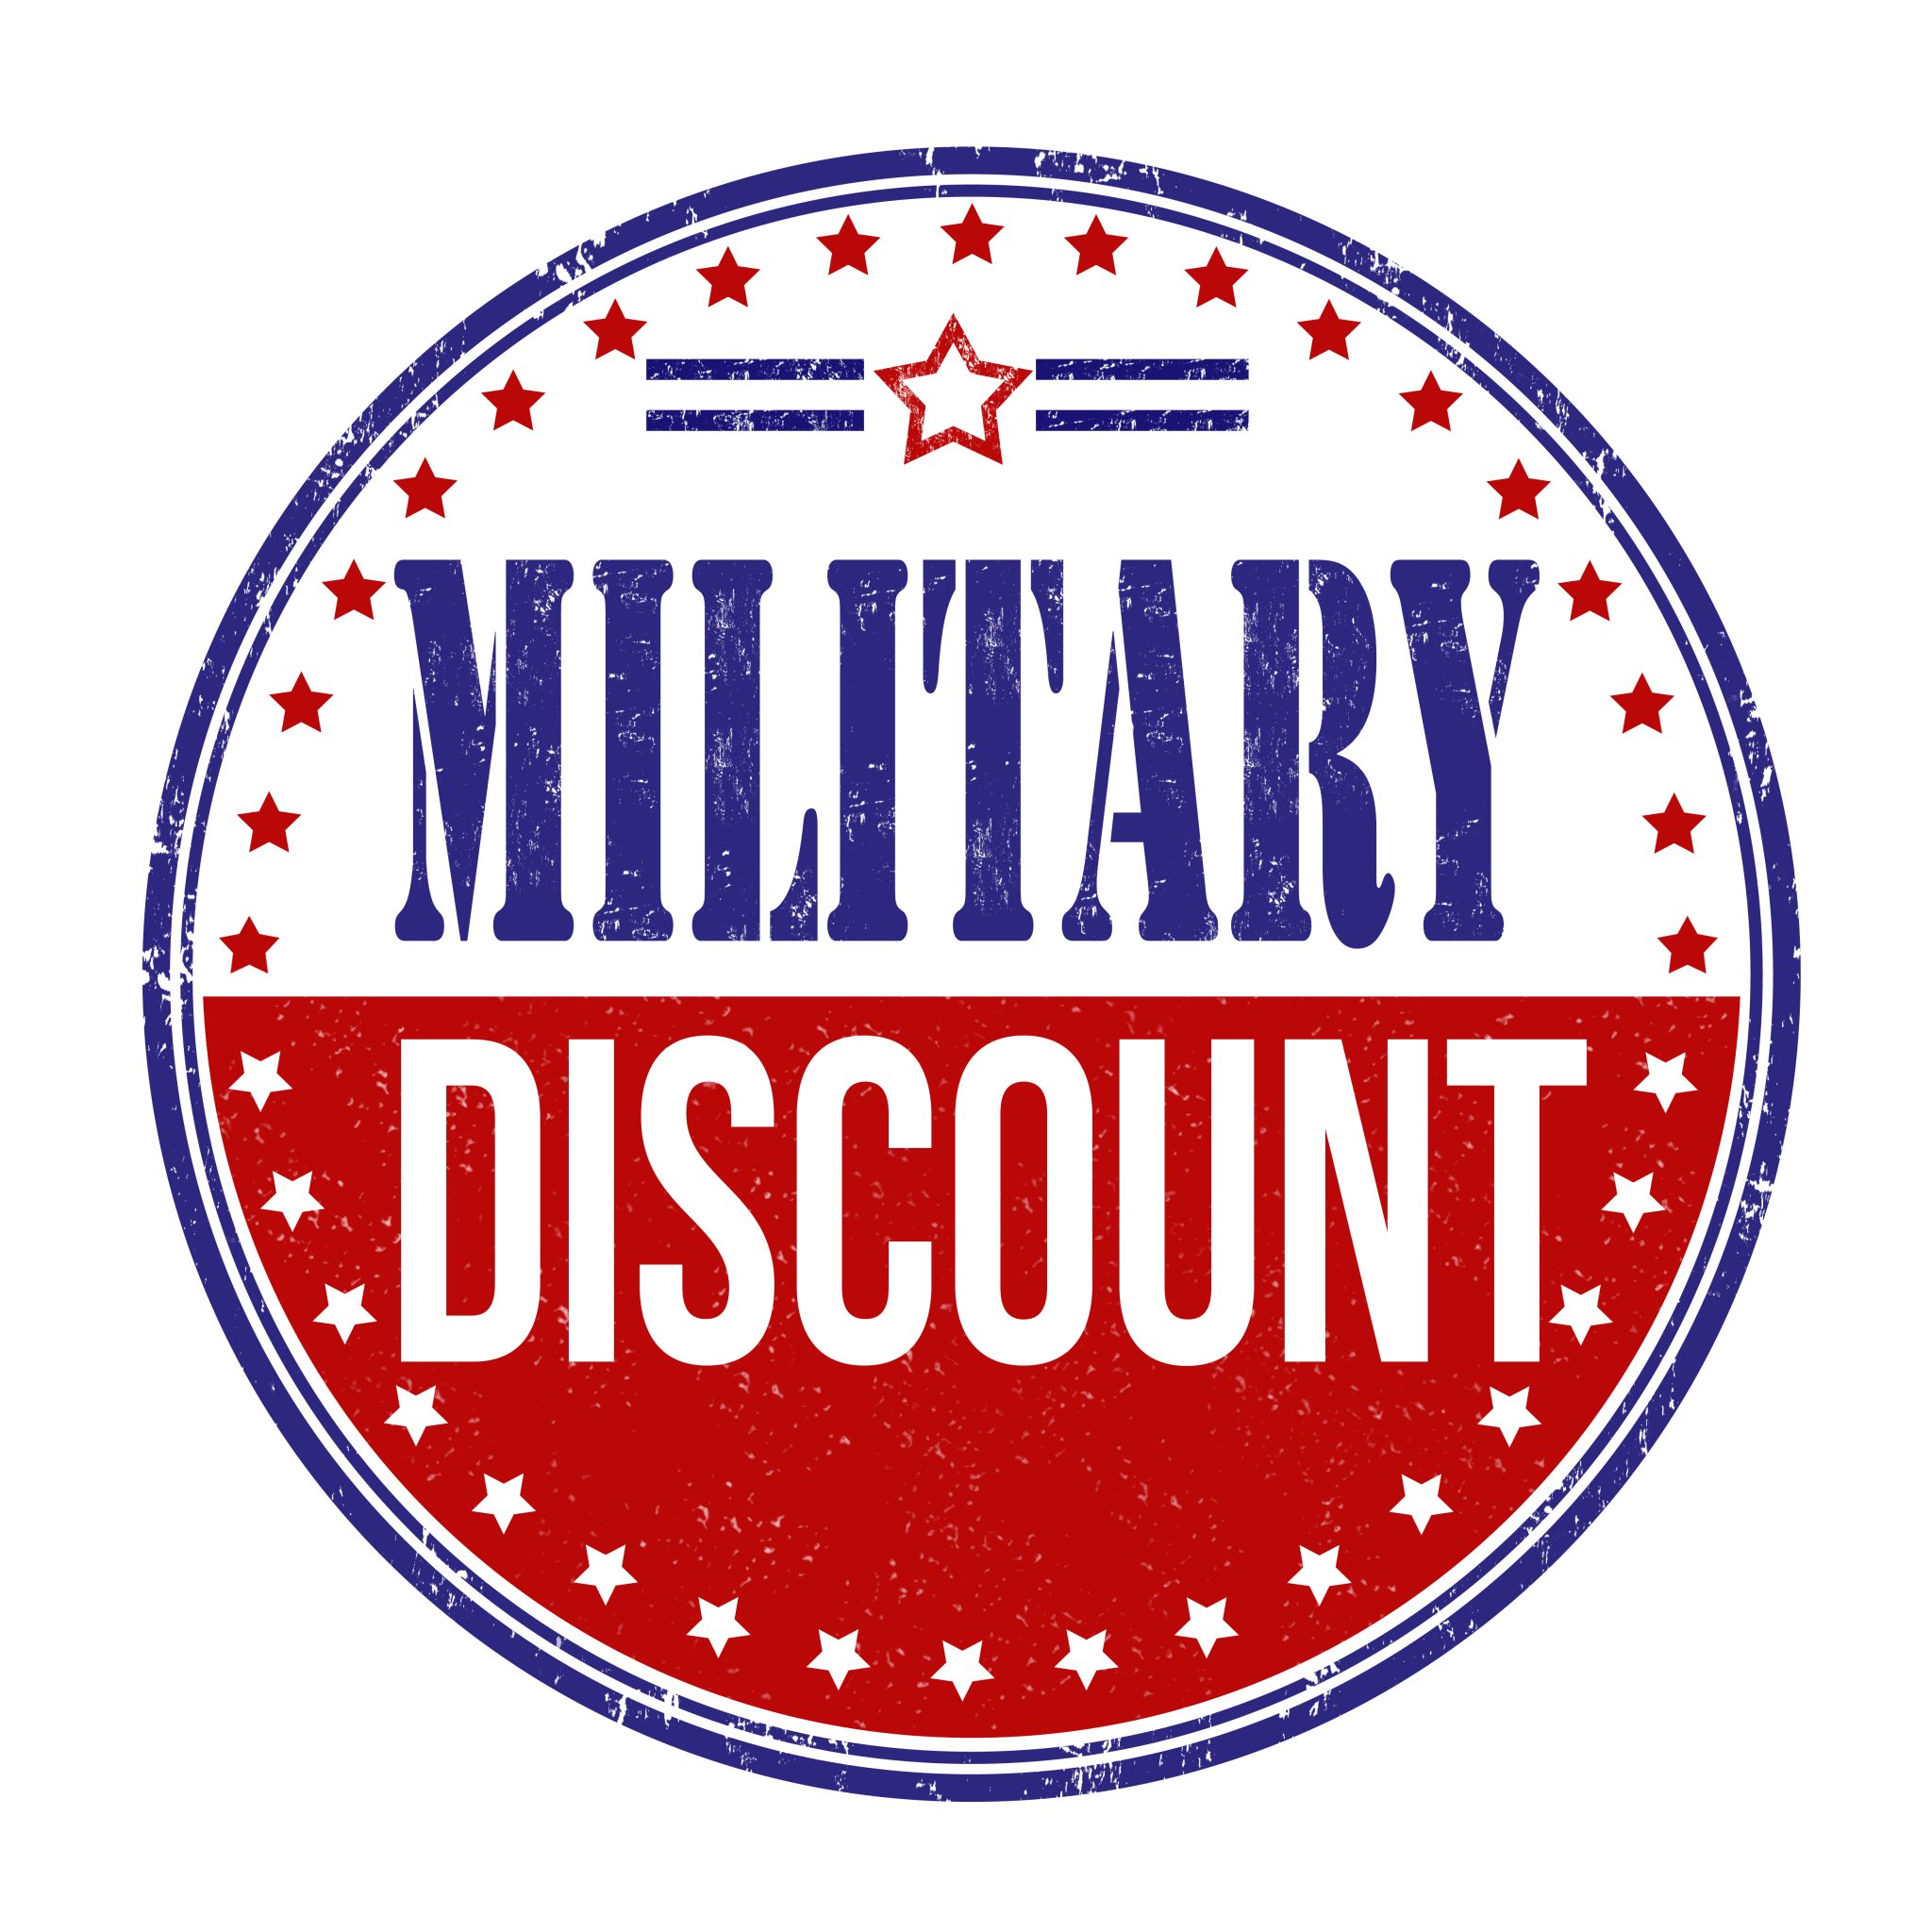 Dynamic Auto Movers Proudly Offers Military Discounts for Vehicle Transportation